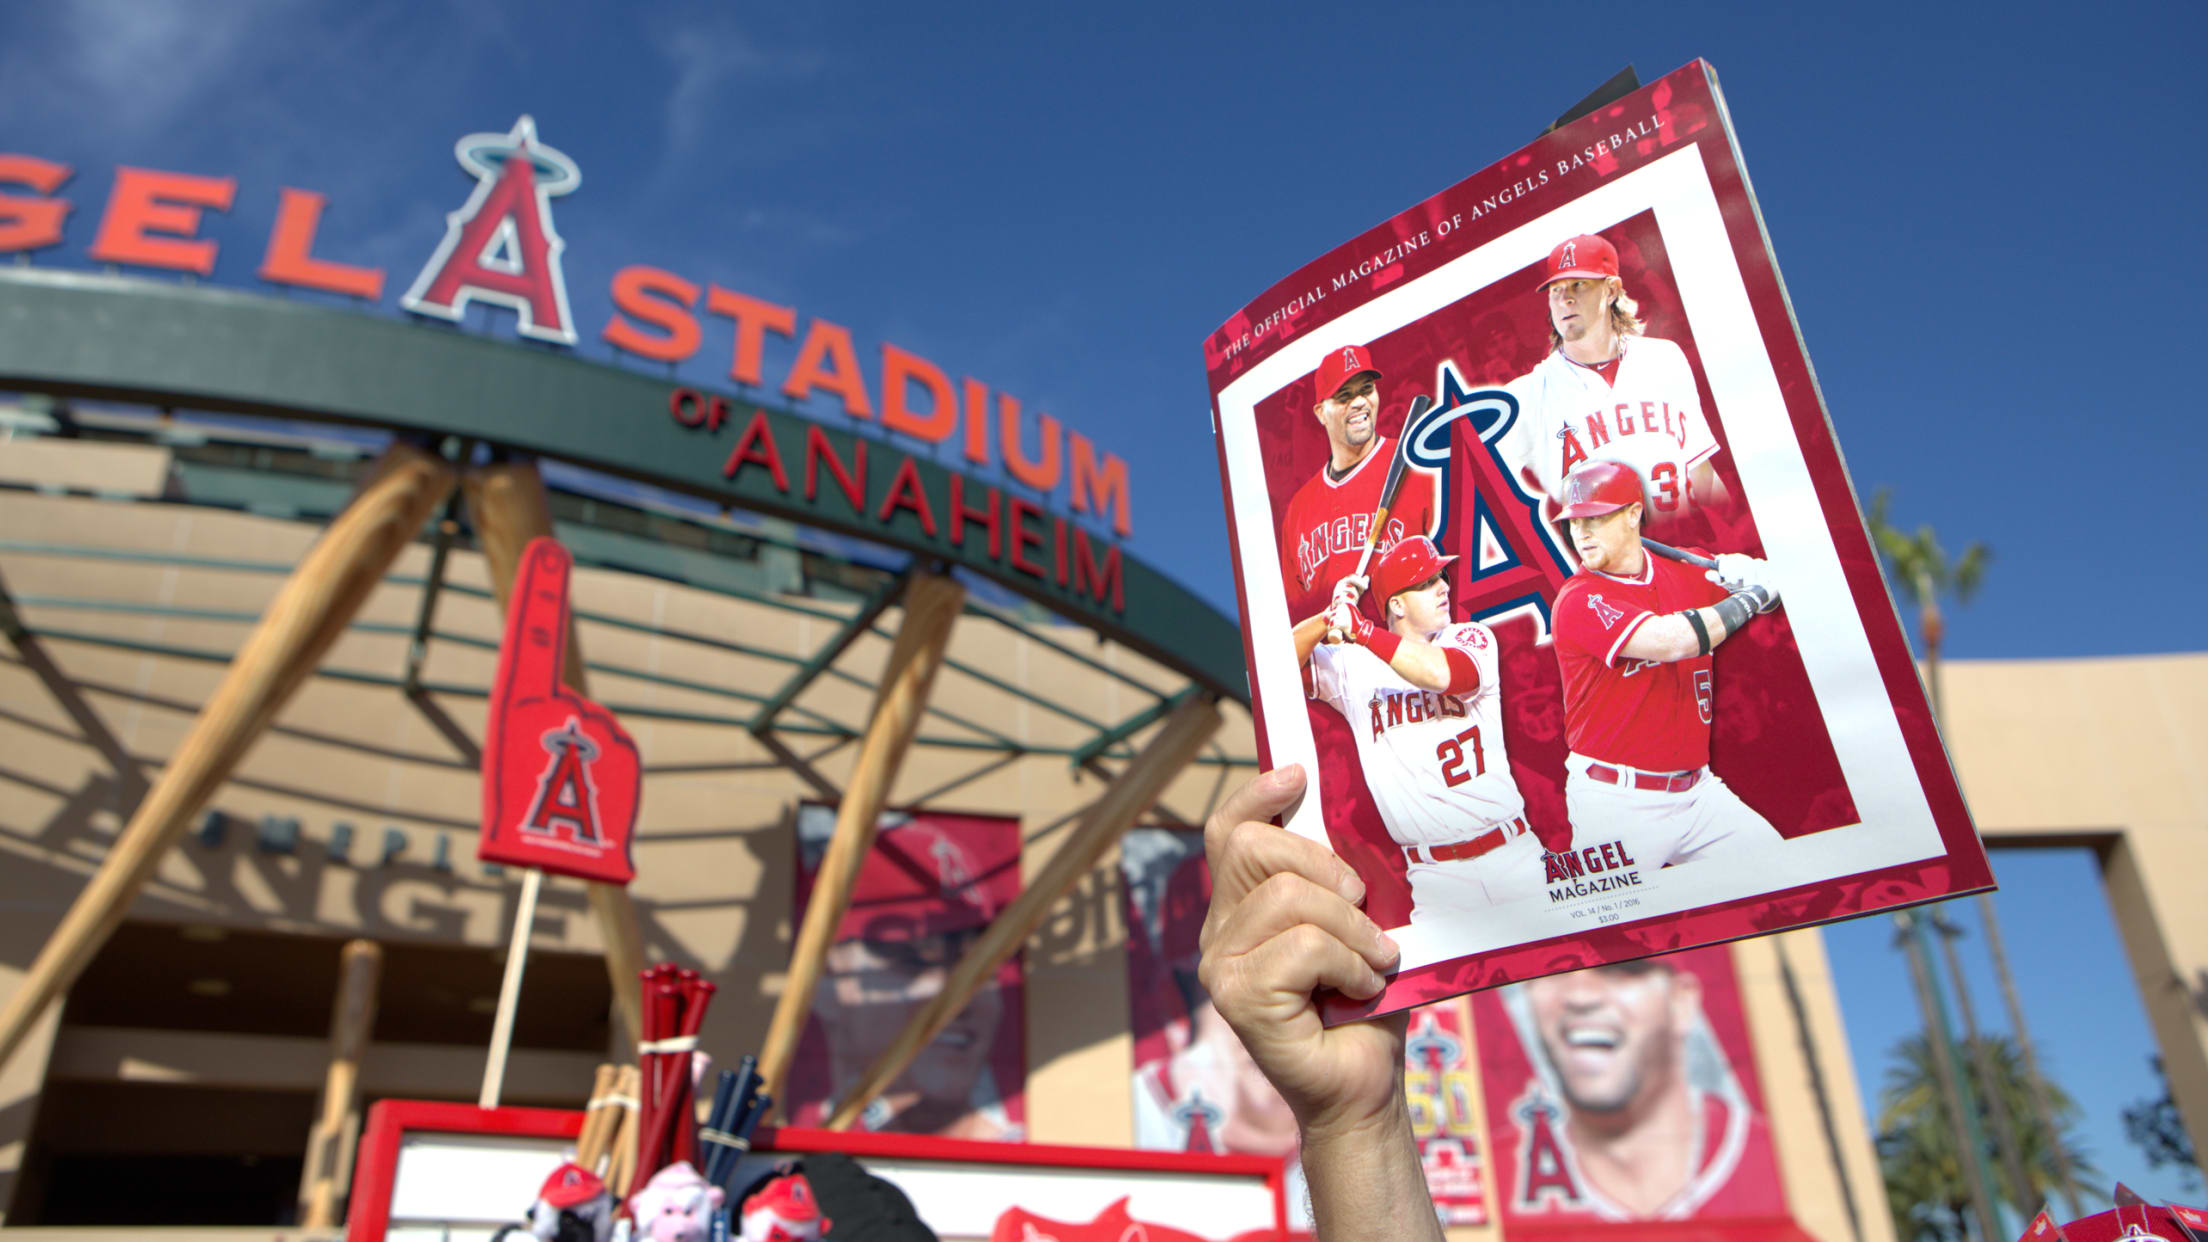 Los Angeles Angels Fan Central